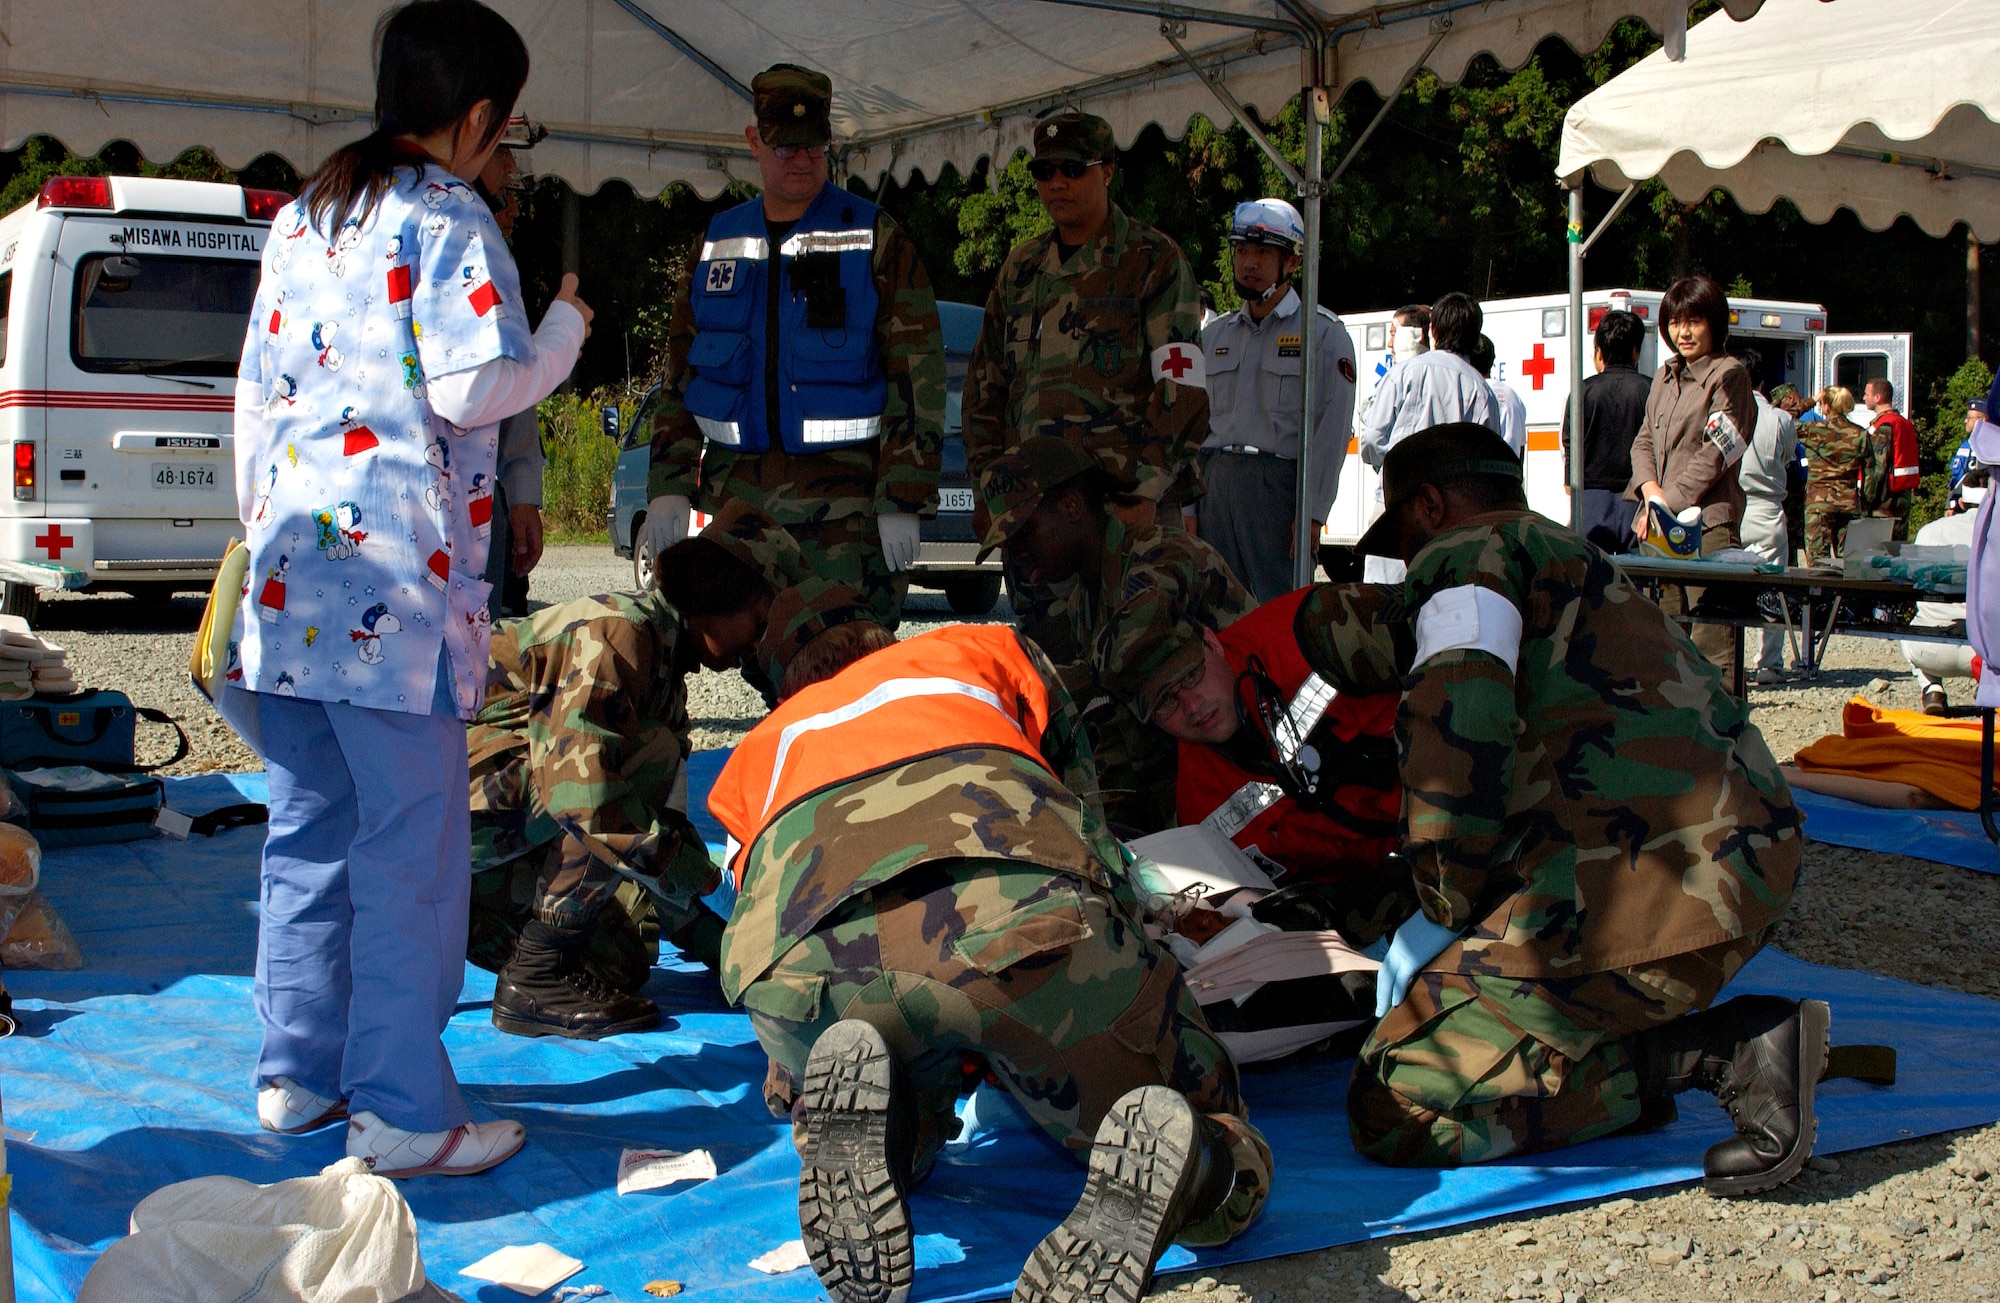 MISAWA AIR BASE, Japan -- Lt. Col. Yolanda Bledsoe, 35th Medical Operations Squadron commander, oversees Misawa Air Base medical personnel as they prepare to transport a victim during the Misawa City Disaster Preparation Exercise held at the Misawa Ice Arena Oct. 14, 2007. (US Air Force photo by Airman 1st Class Eric Harris)(RELEASED)